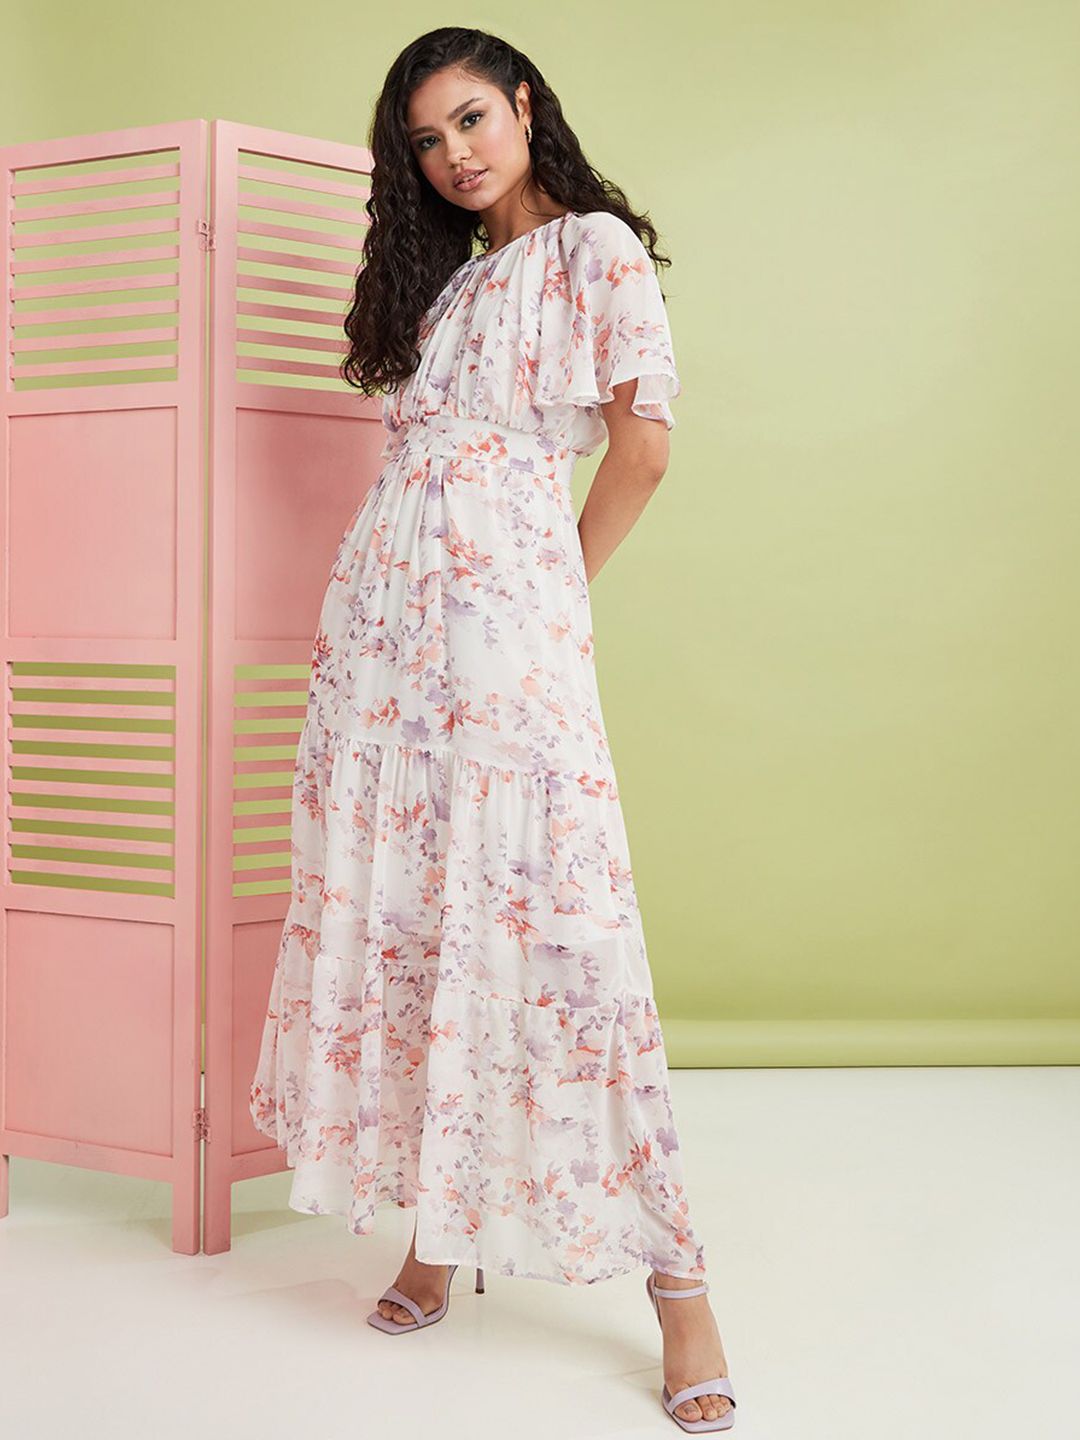 Styli White Floral Maxi Dress Price in India